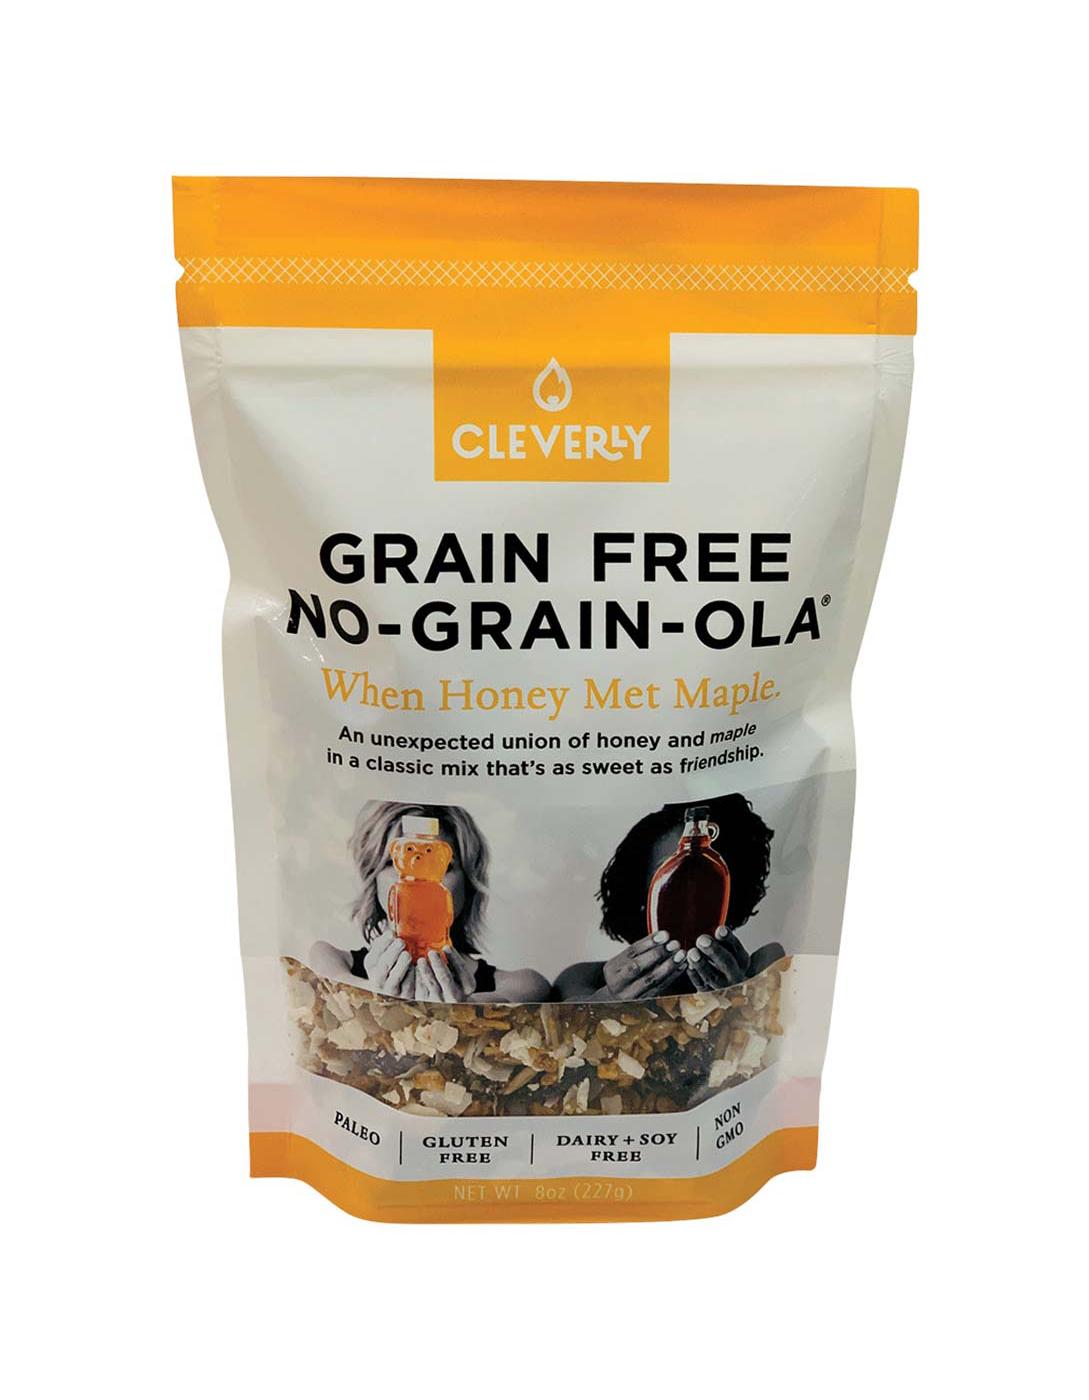 Cleverly Grain-Free No-Grain-Ola - When Honey Met Maple; image 1 of 6